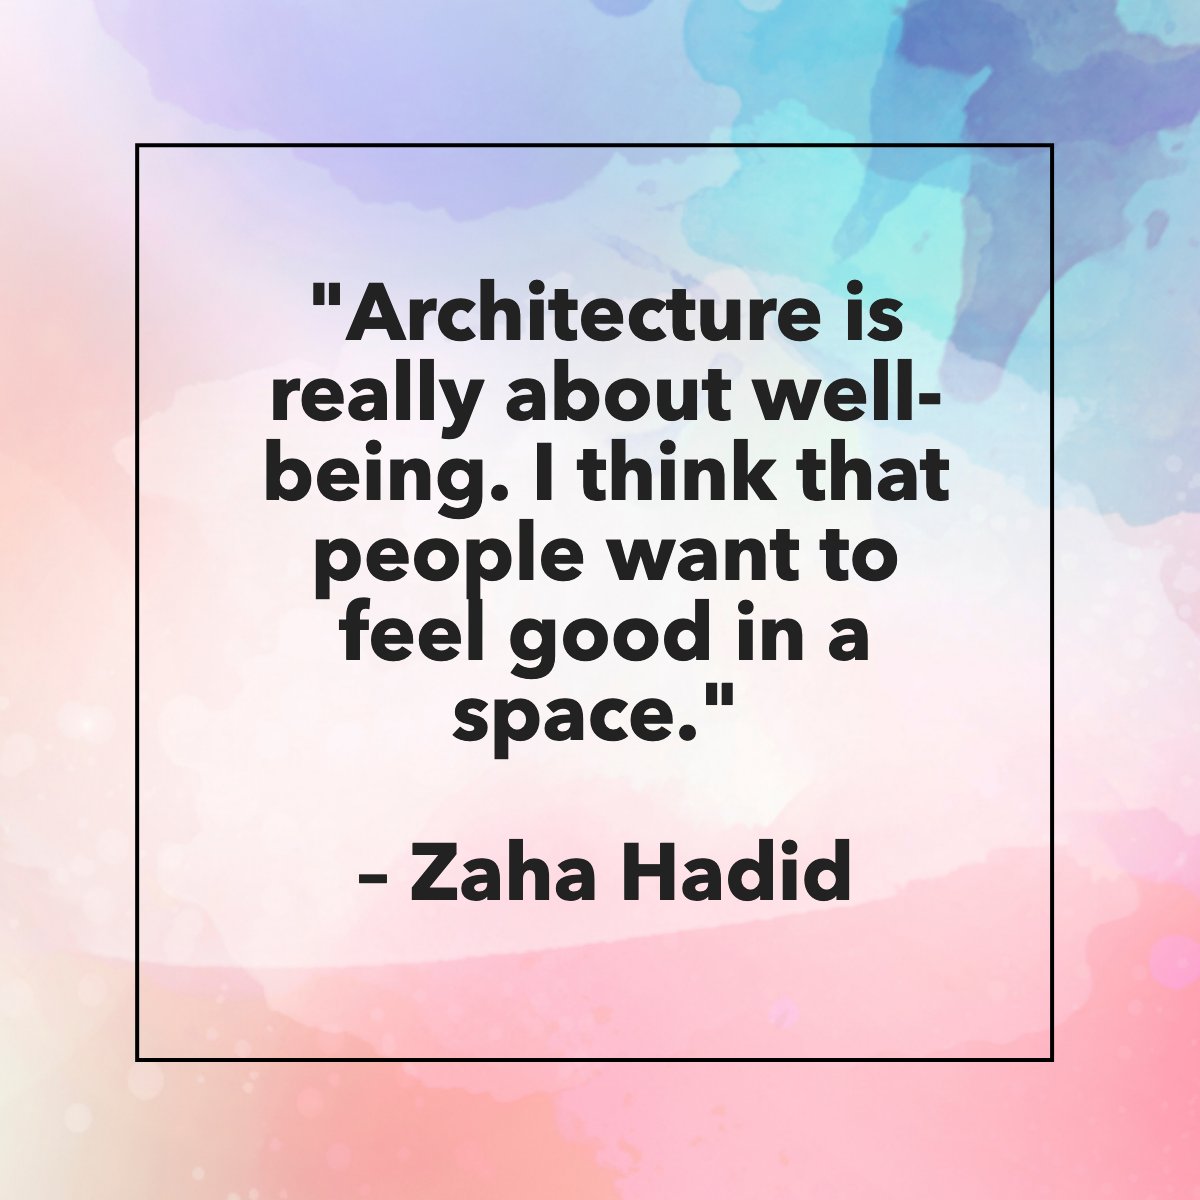 'Architecture is really about well-being. I think that people want to feel good in a space.' ― Zaha Hadid 📖 #quote #quoteoftheday #design #style #interiordesign #comfort #premierrealestatenetwork #pren #realestate #realtor #prescottquadcity #sedonaverdevalley